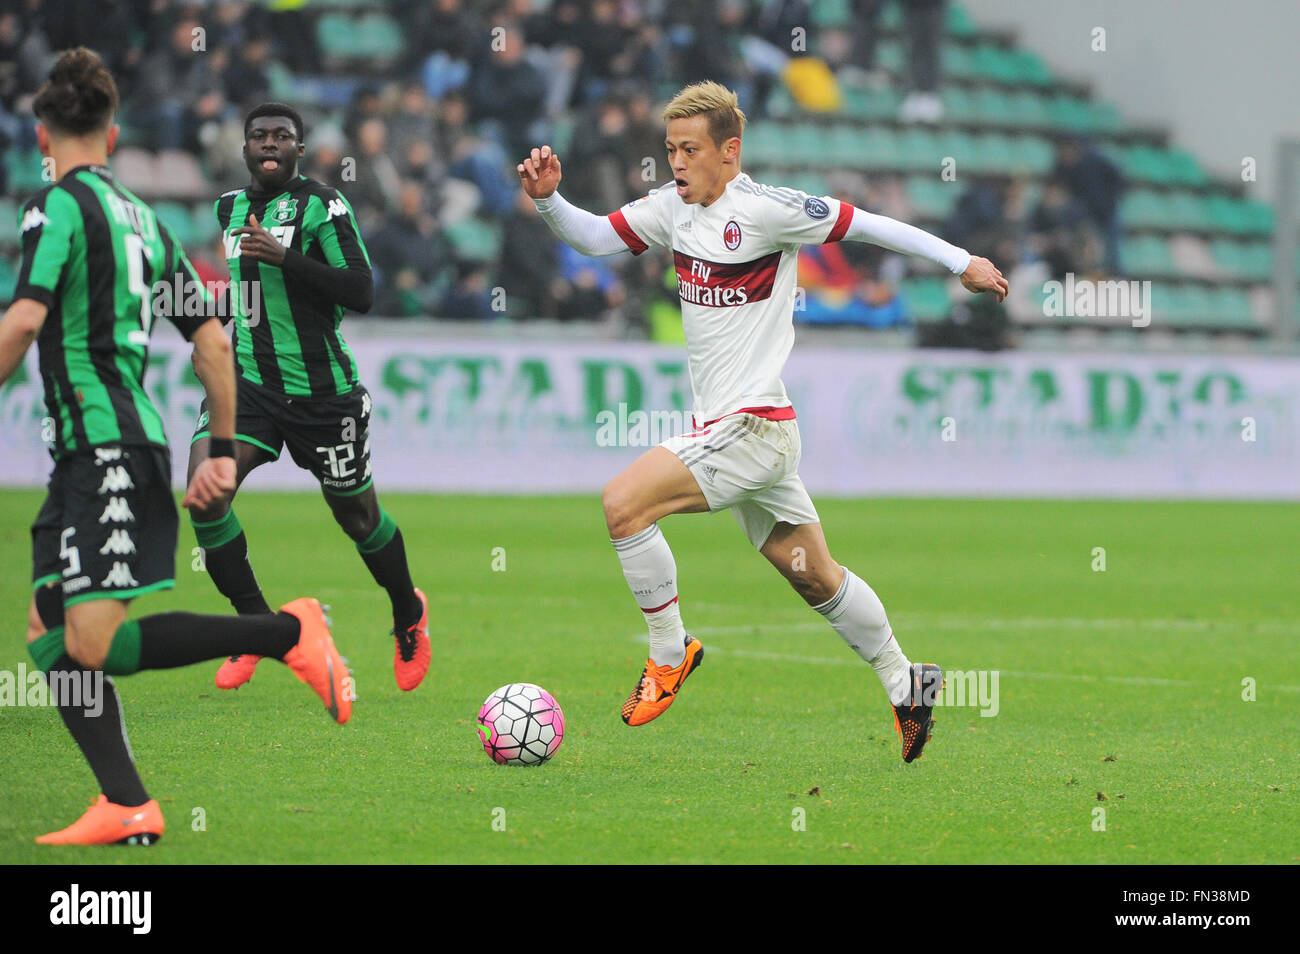 Italy. 06th Mar, 2016. Keisuke Honda Milan's forward and national team of Japan during the Serie A football match between Sassuolo and AC Milan at Mapei Stadium in Reggio Emilia, Italy. US Sassuolo Calcio wins 2 - 0 over AC Milan. Joseph Alfred Duncan and Nicola Domenico Sansone are the scorers. © Massimo Morelli/Pacific Press/Alamy Live News Stock Photo